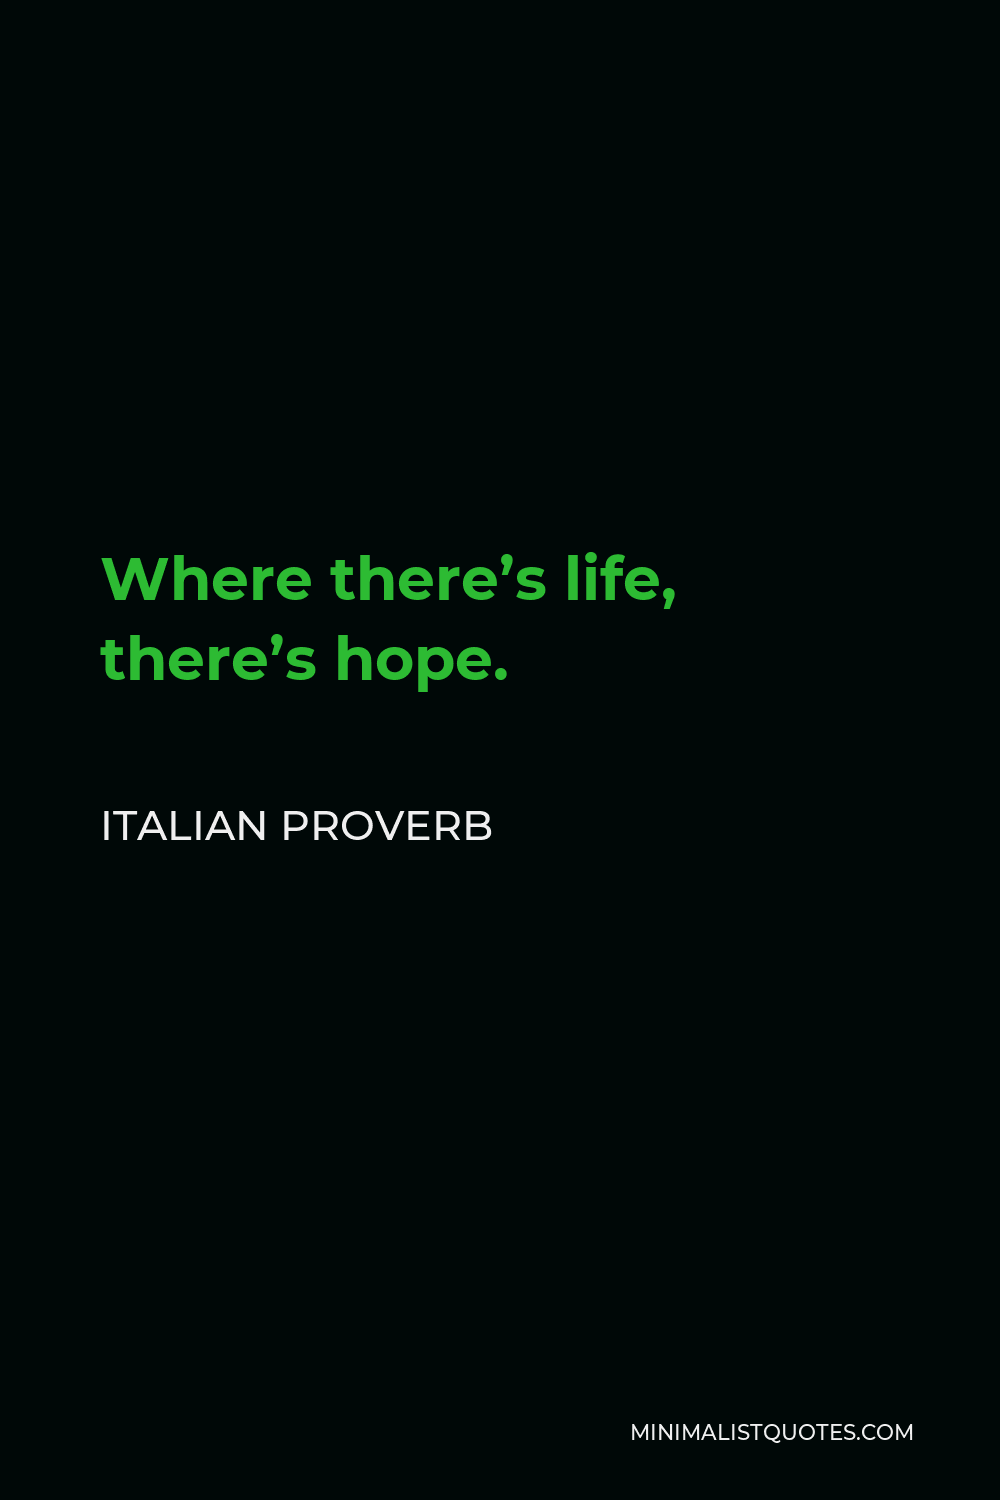 Italian Proverb Quote - Where there’s life, there’s hope.